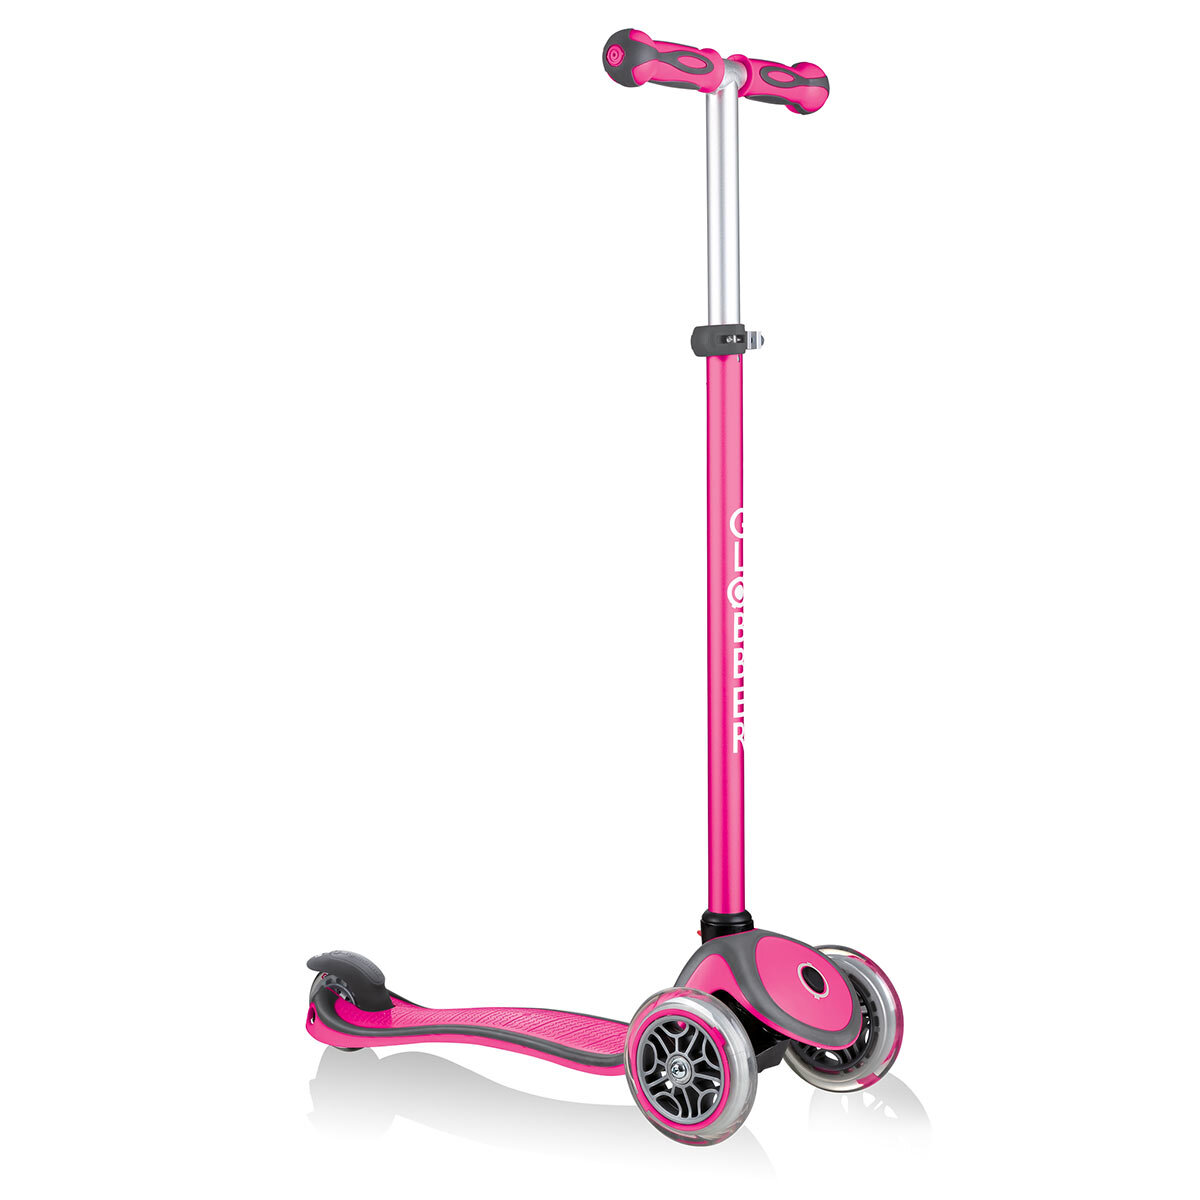 Buy Globber Go Up Comfort Scooter in Pink Step 5 Image at Costco.co.uk